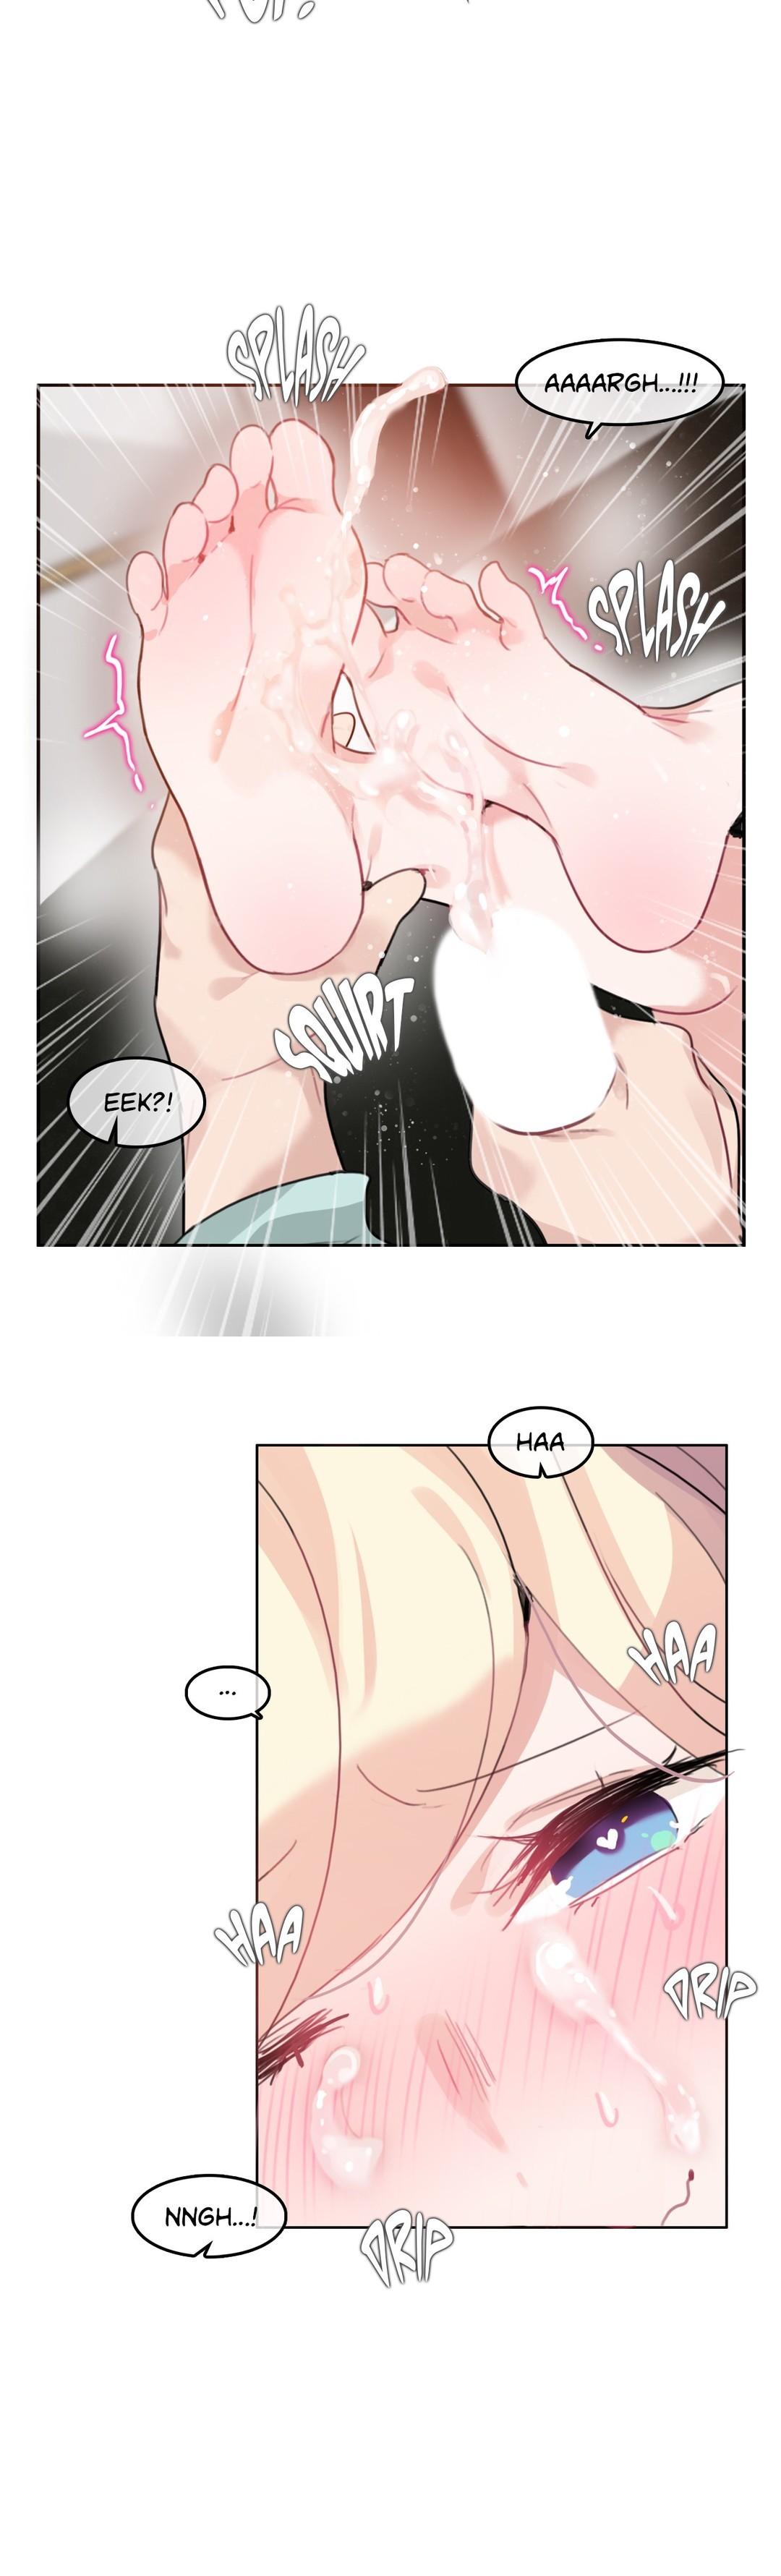 A Pervert's Daily Life Ch. 1-34 701